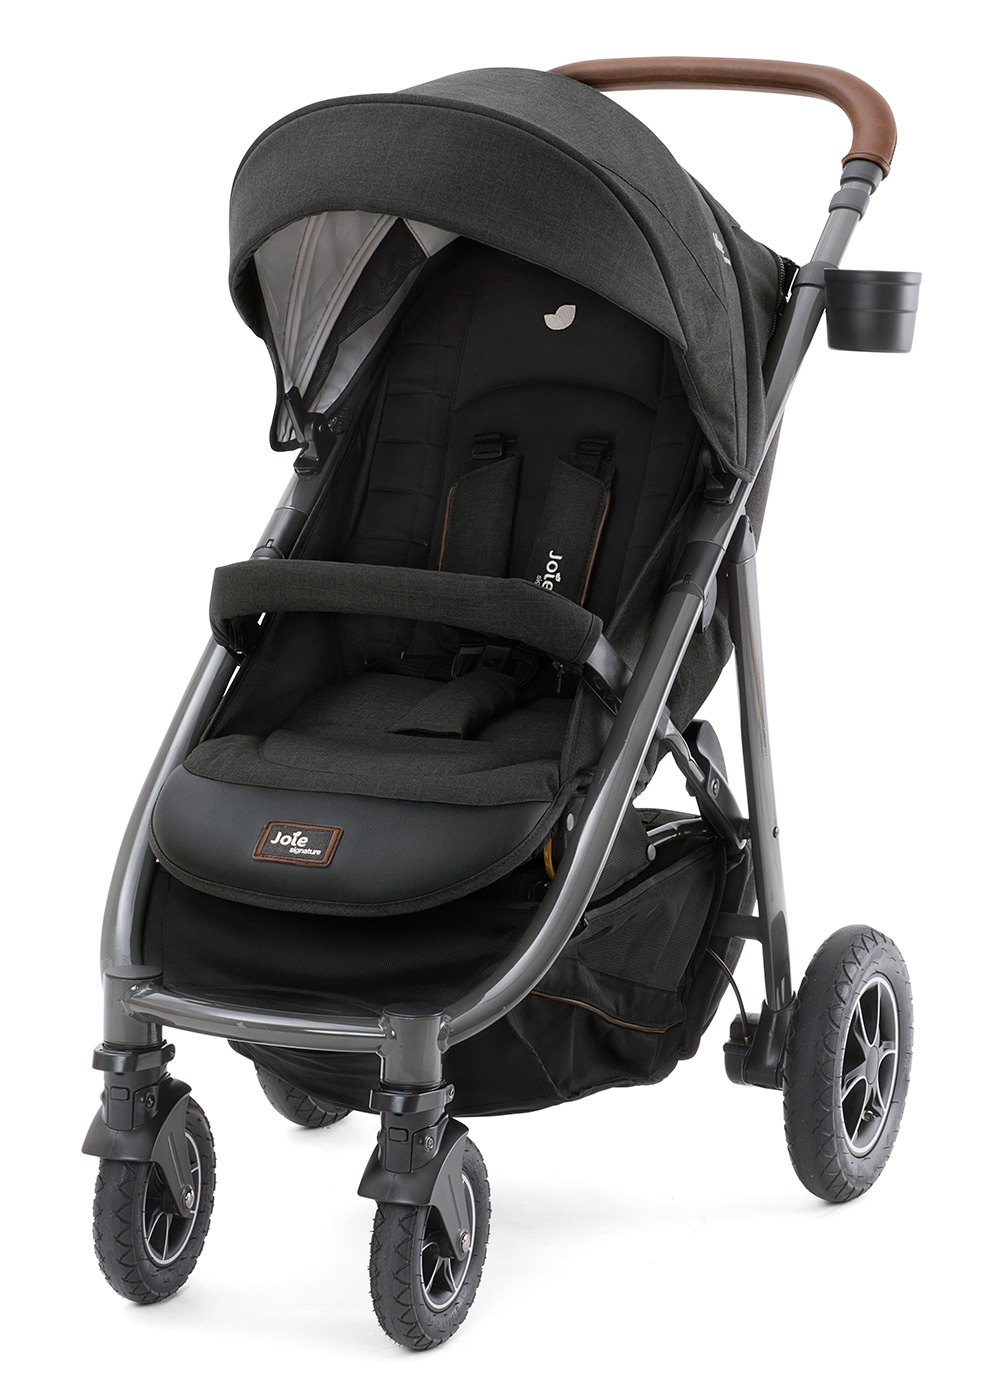 worst Terughoudendheid winter Joie Mytrax Flex Signature stroller reviews, questions, dimensions |  pushchair experts advise @Strollberry